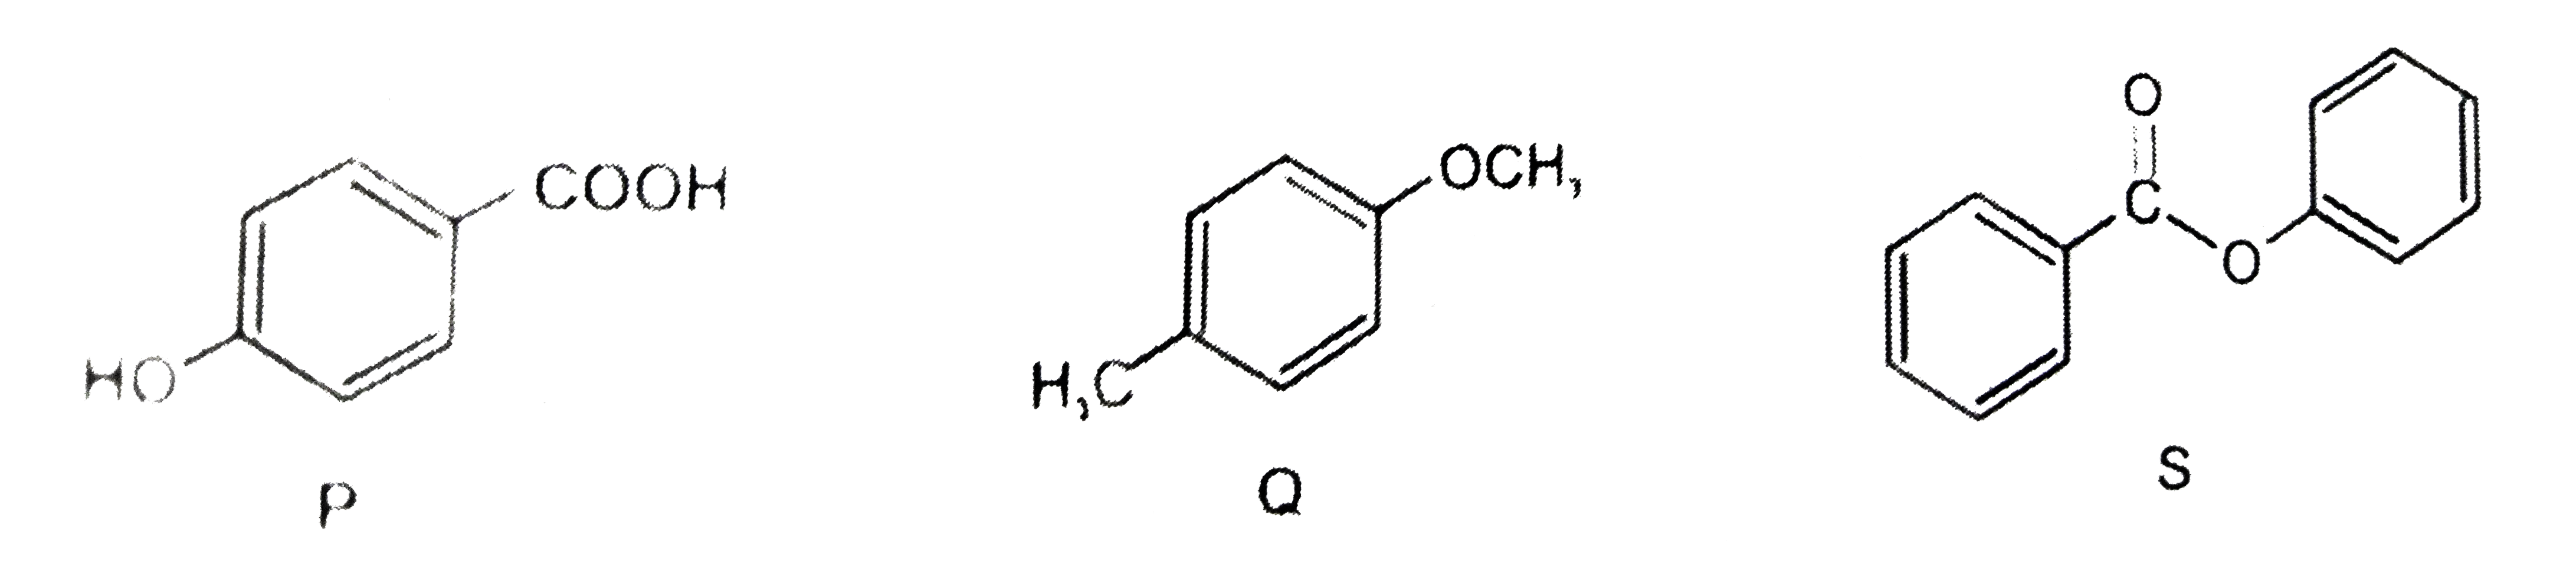 The compounds P,Q and S were separately to nitration using HNO3//H2SO4 mixture.The major product formed in each case respectively is :